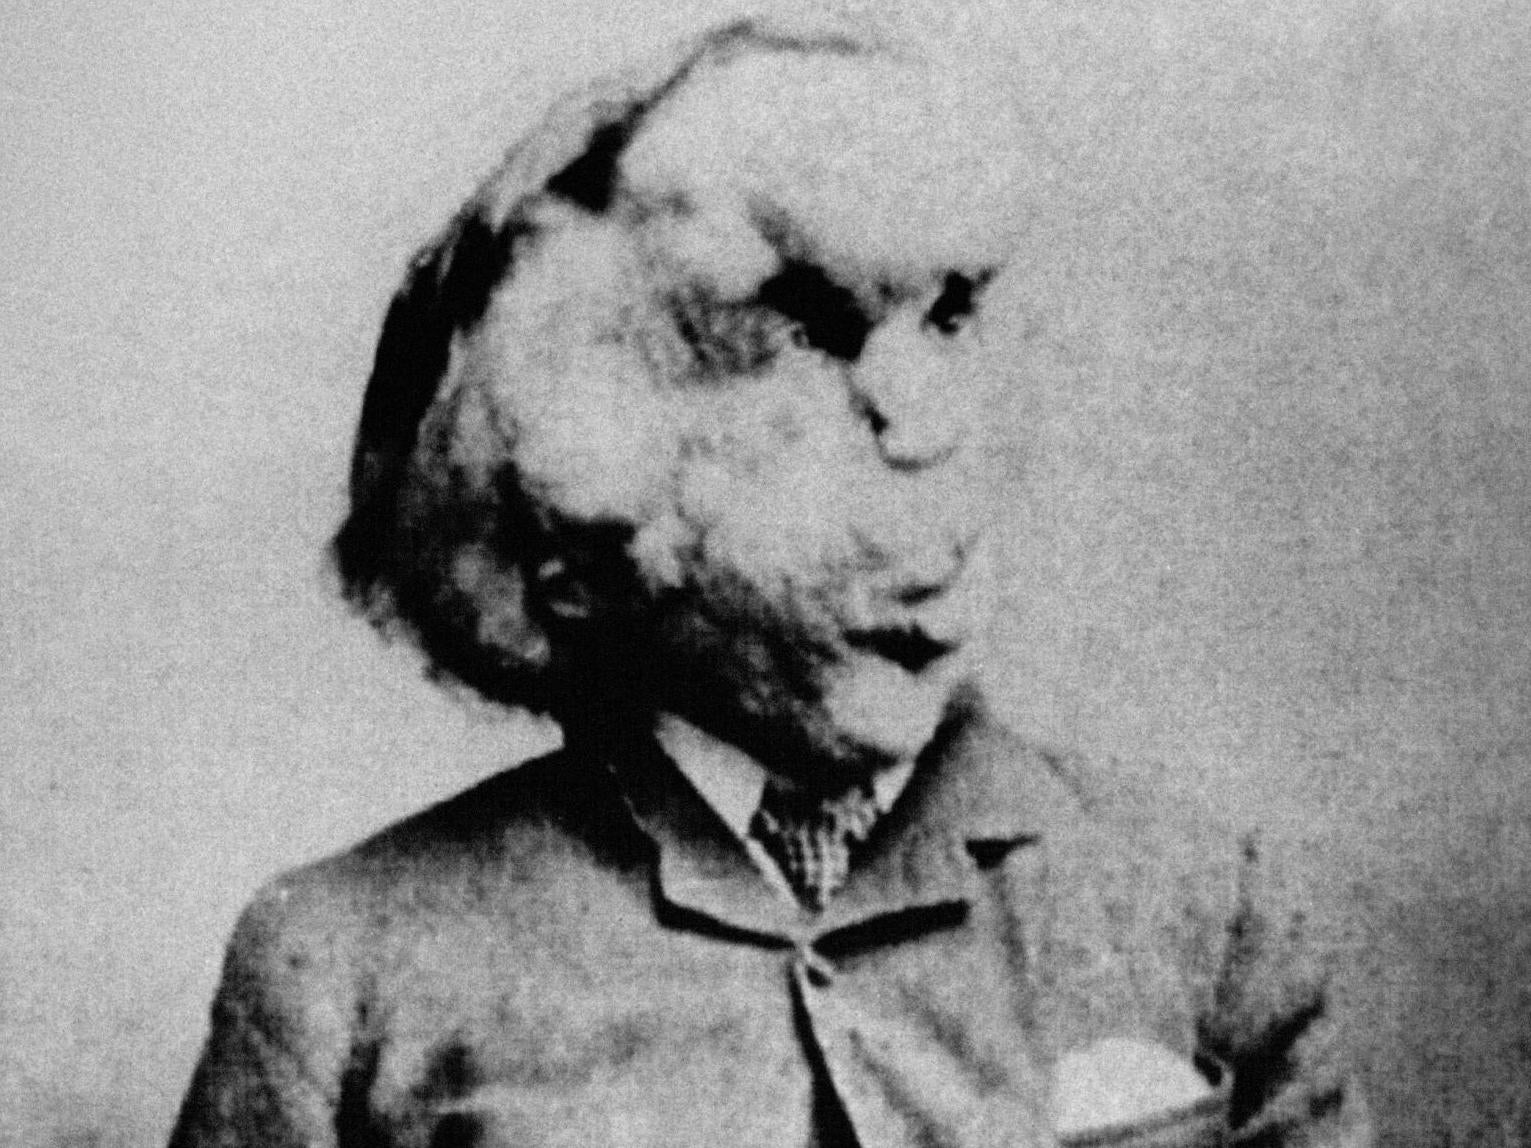 Joseph Merrick, photographed by Radiological Society of North America